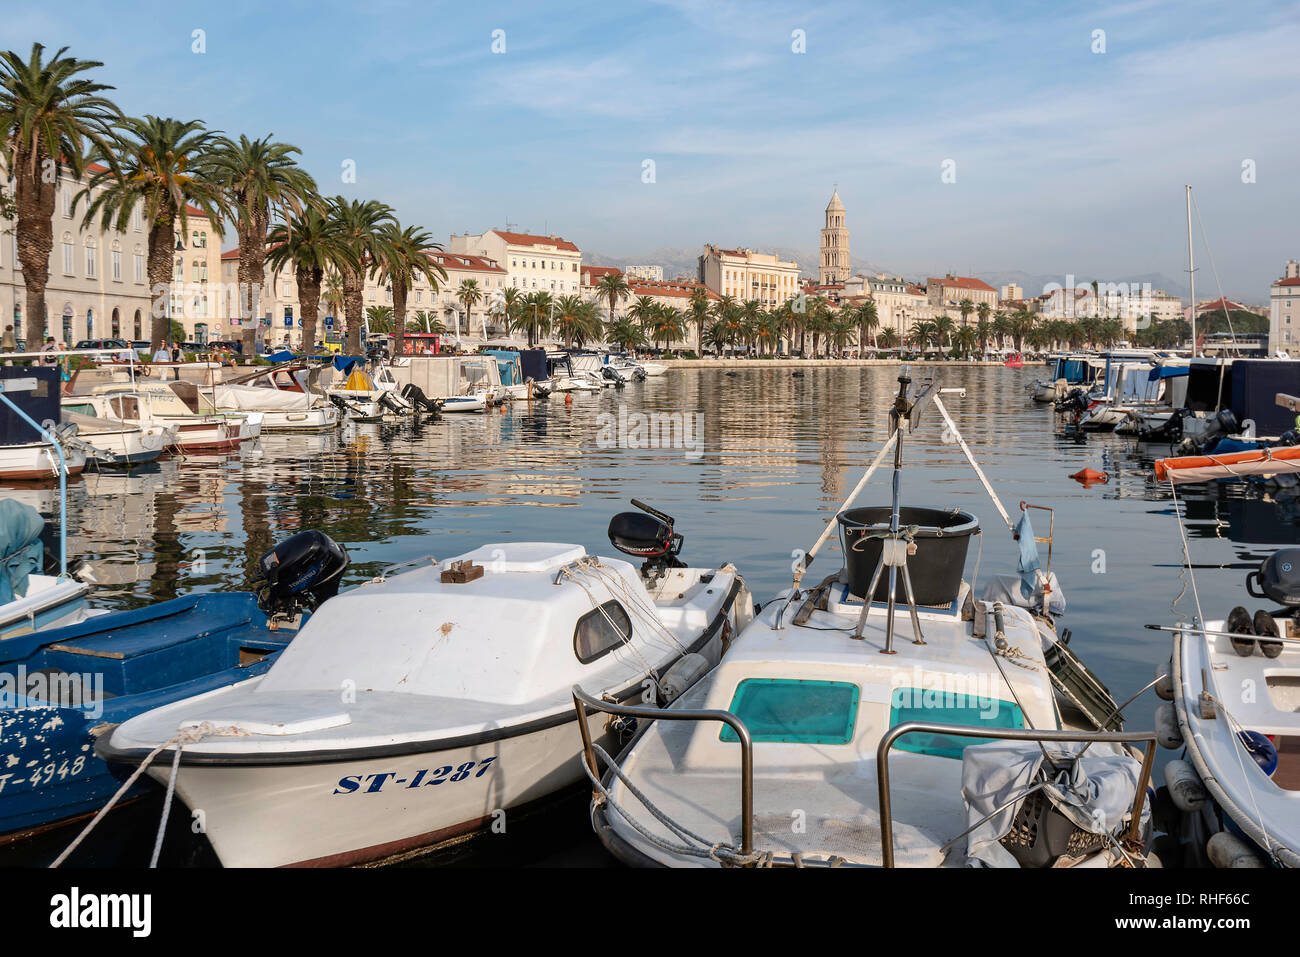 A view of the harbor and waterfront in Split, Croatia Stock Photo